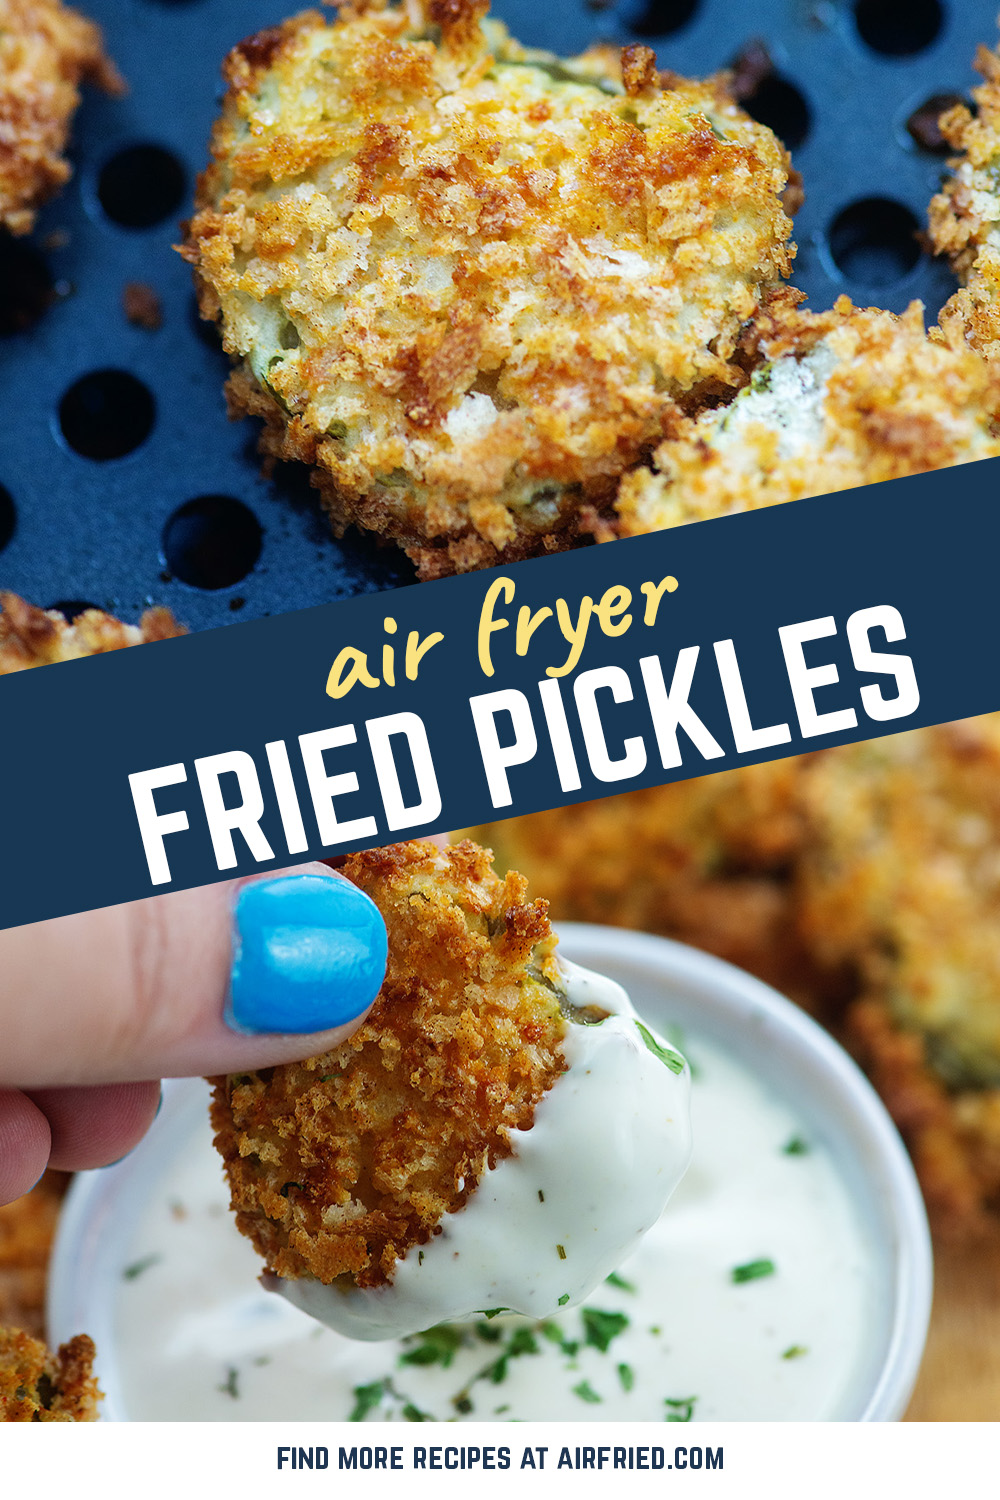 Crispy, crunchy fried pickles in the air fryer! The breading is so simple and they cook in just 10 minutes.